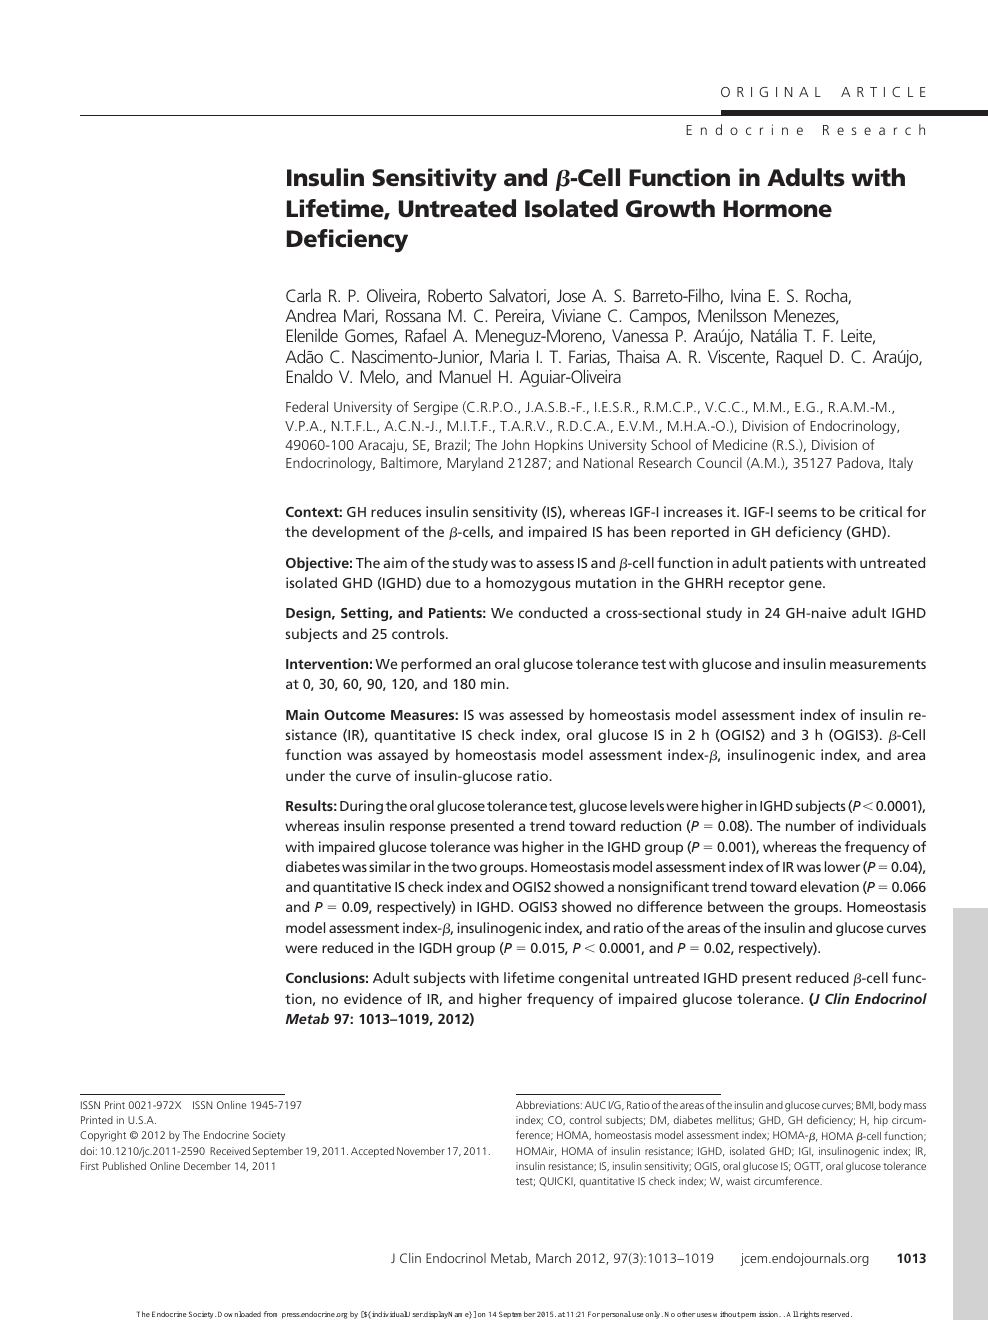 Insulin Sensitivity And B Cell Function In Adults With Lifetime Untreated Isolated Growth Hormone Deficiency Topic Of Research Paper In Clinical Medicine Download Scholarly Article Pdf And Read For Free On Cyberleninka